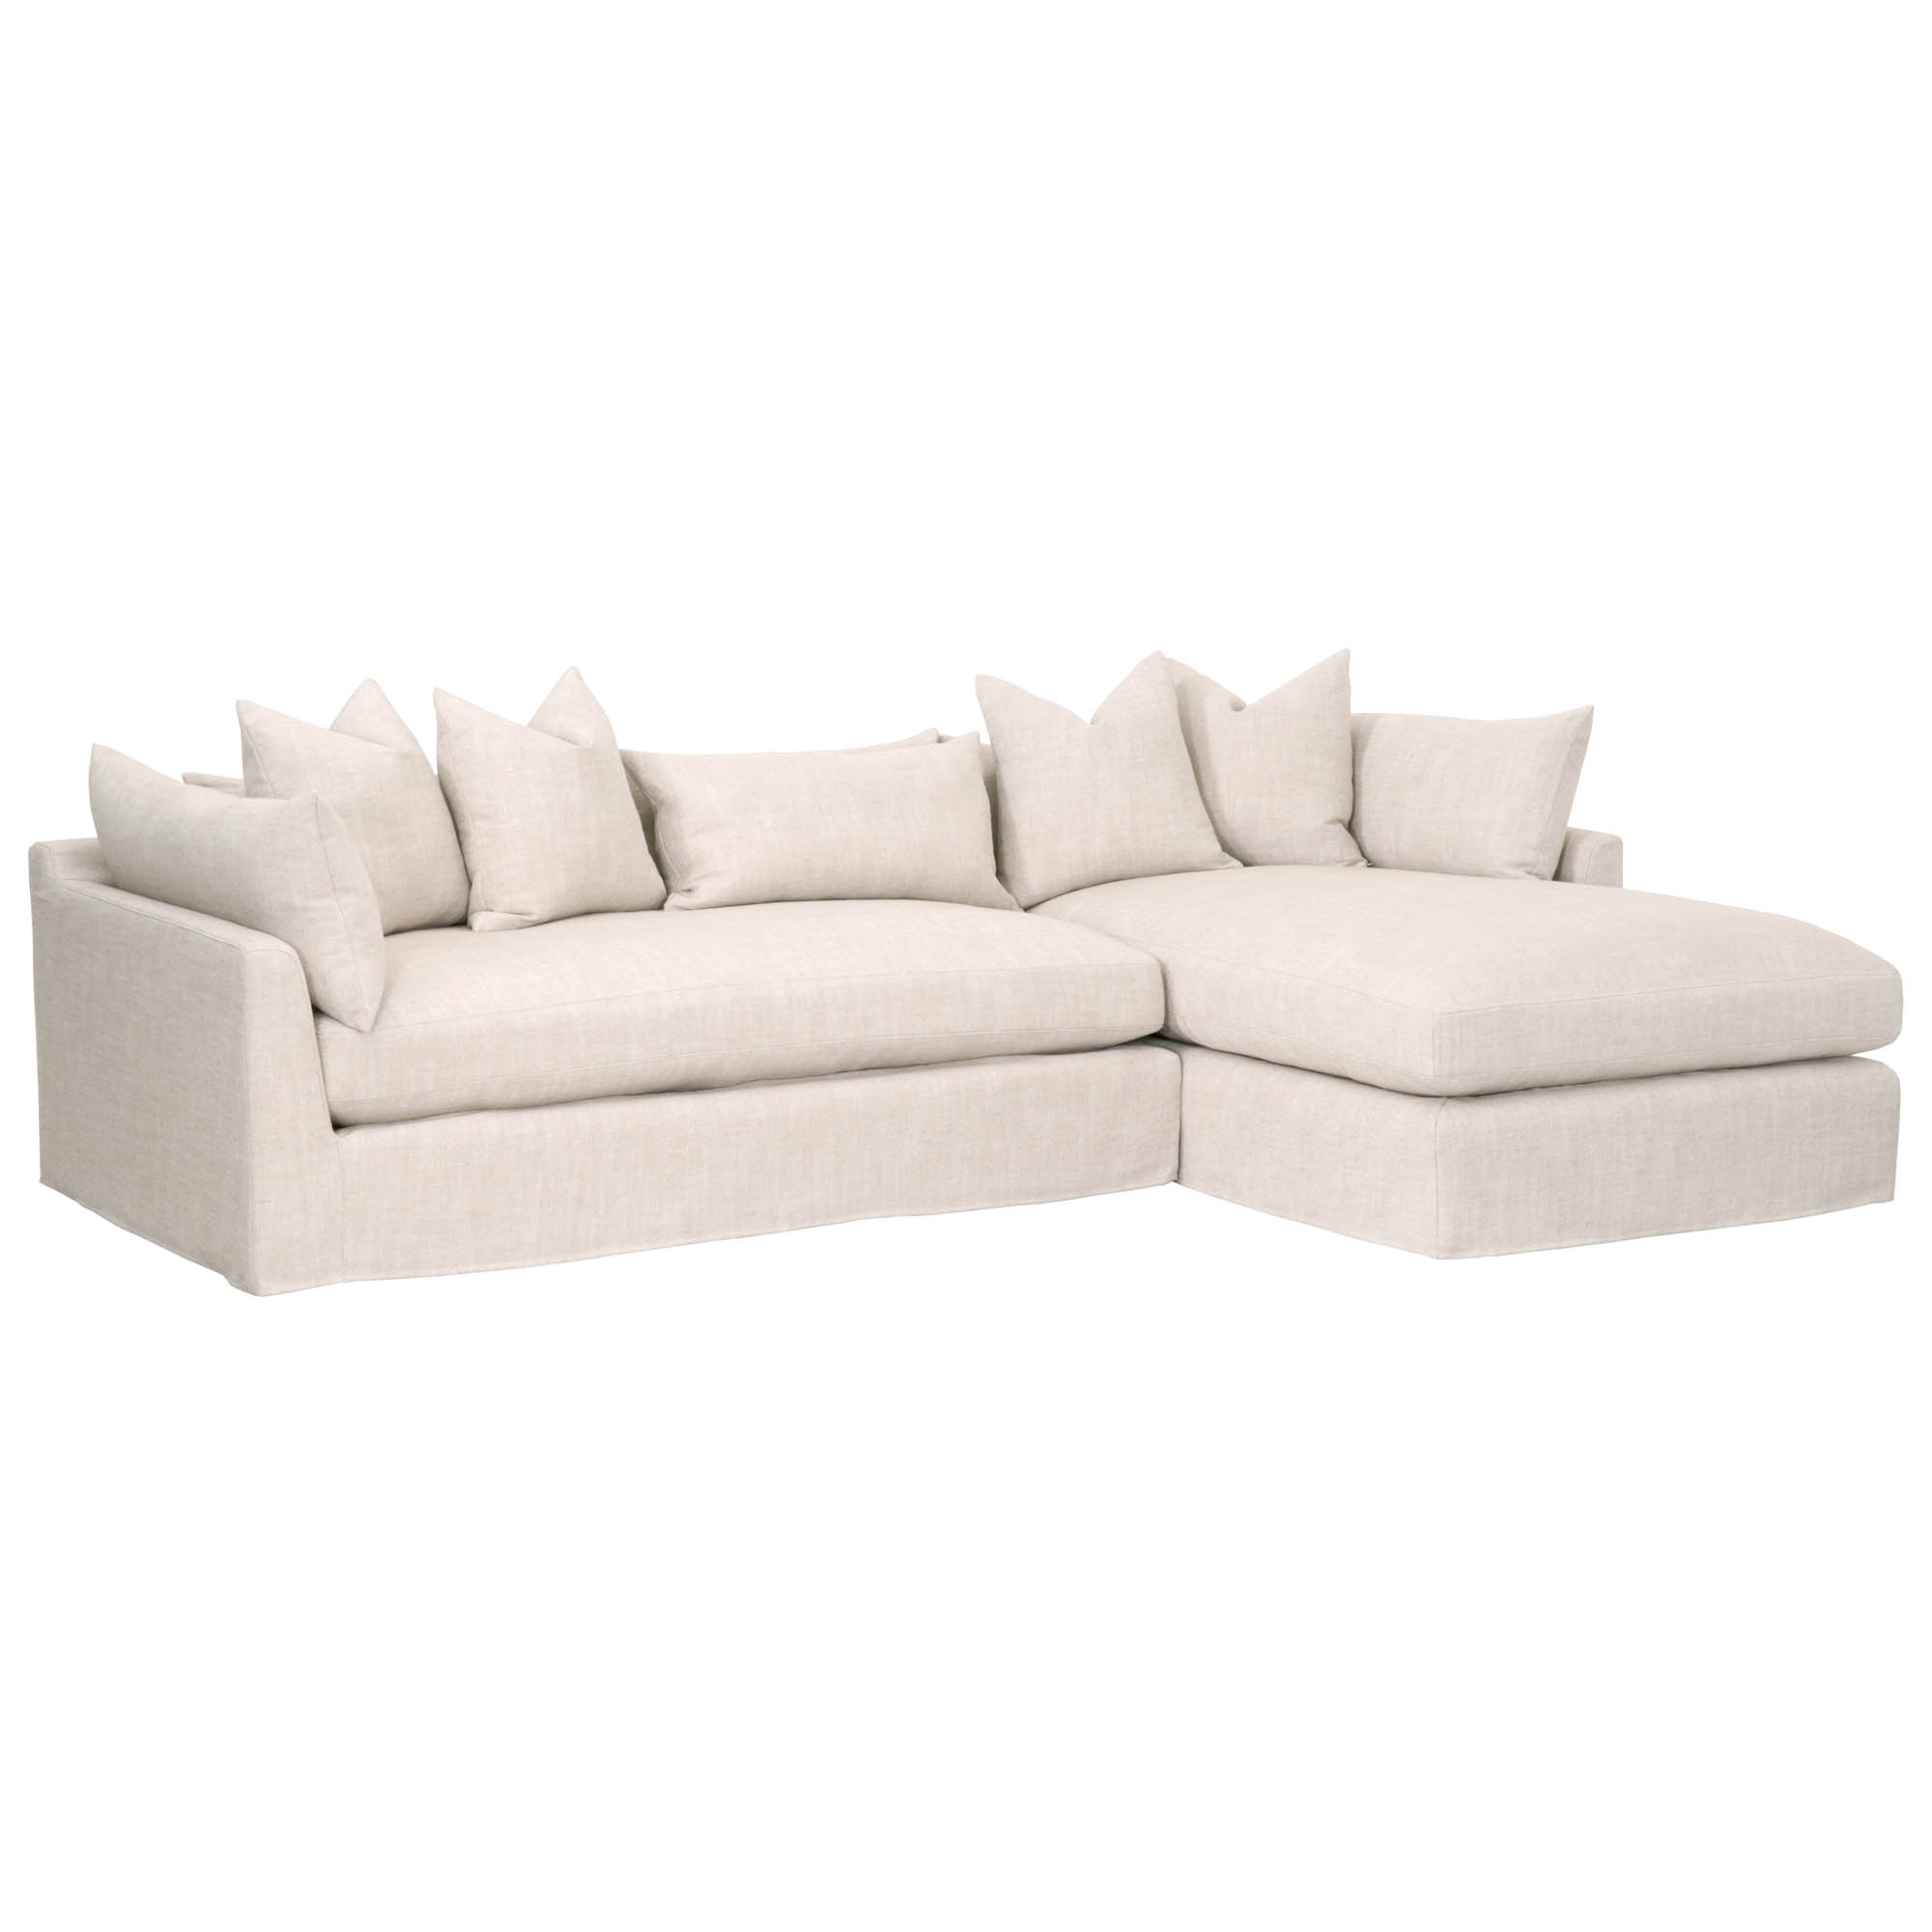 Ridley 110" Right Facing Lounge Slipcover Sectional, Bisque, Espresso - Image 1